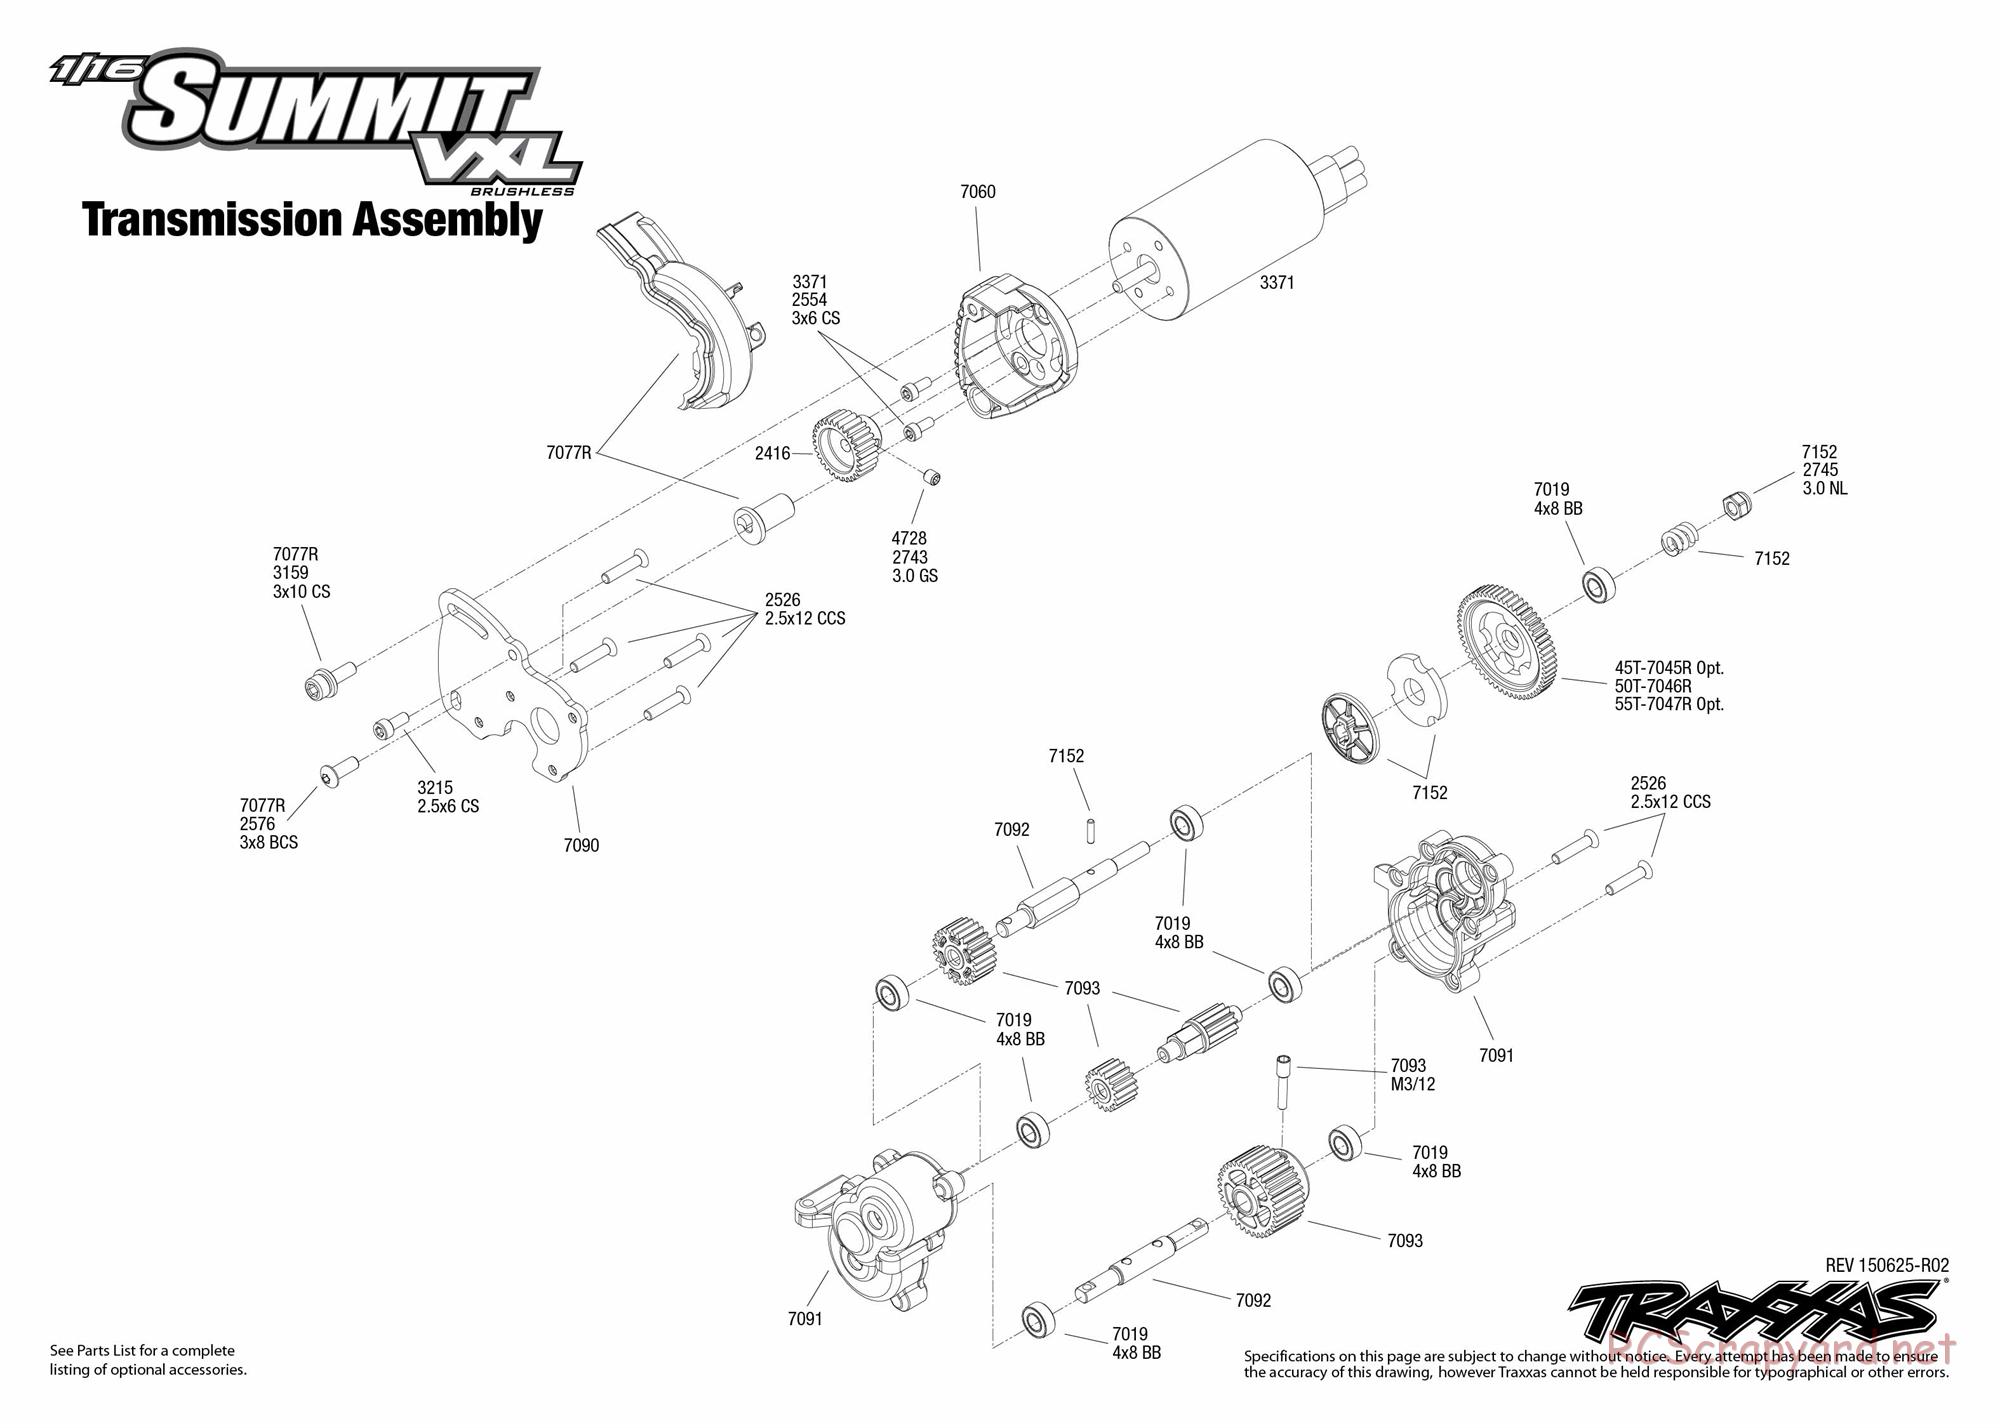 Traxxas - 1/16 Summit VXL (2015) - Exploded Views - Page 5